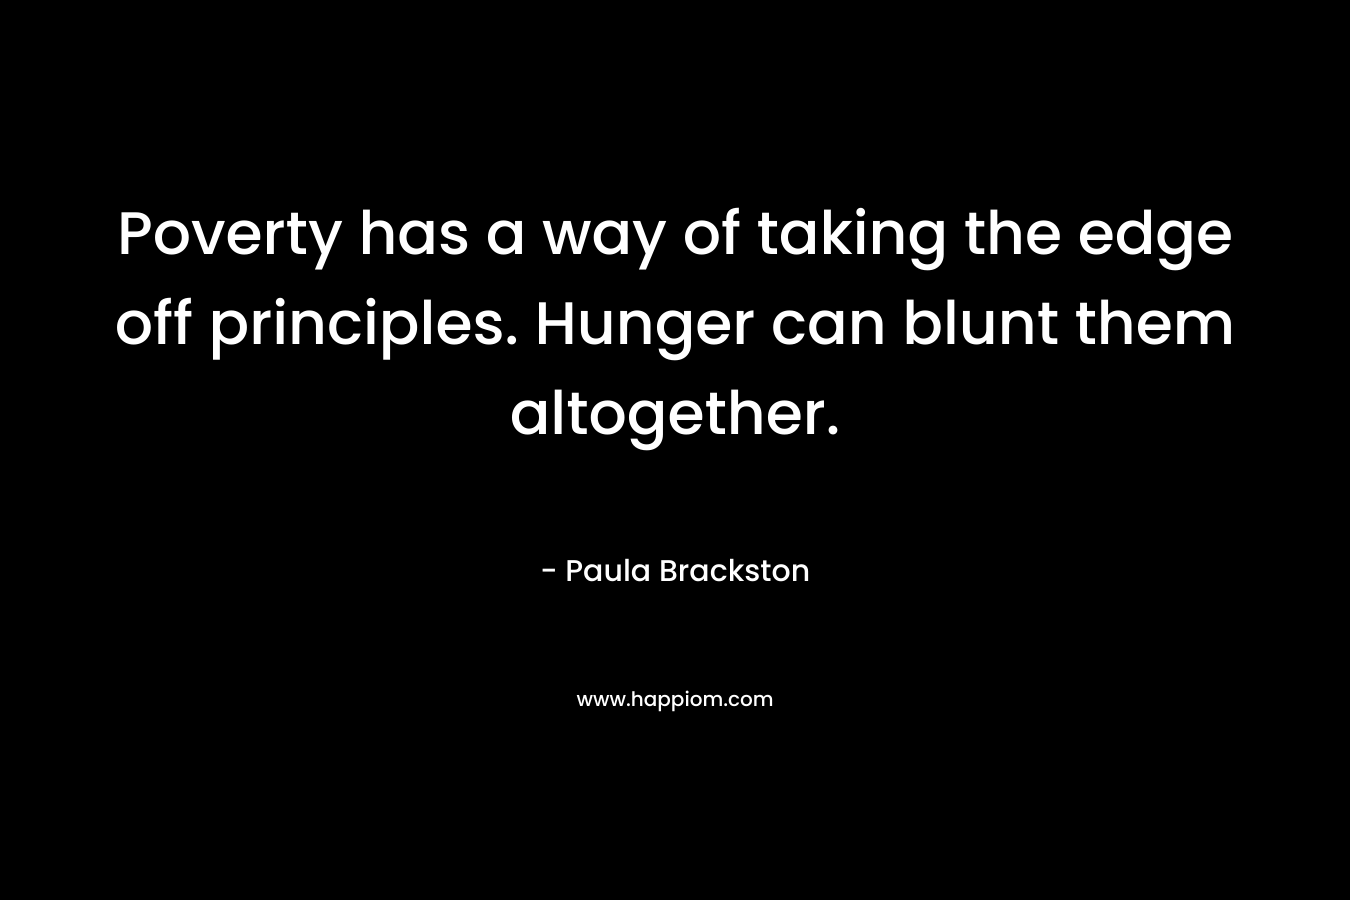 Poverty has a way of taking the edge off principles. Hunger can blunt them altogether.